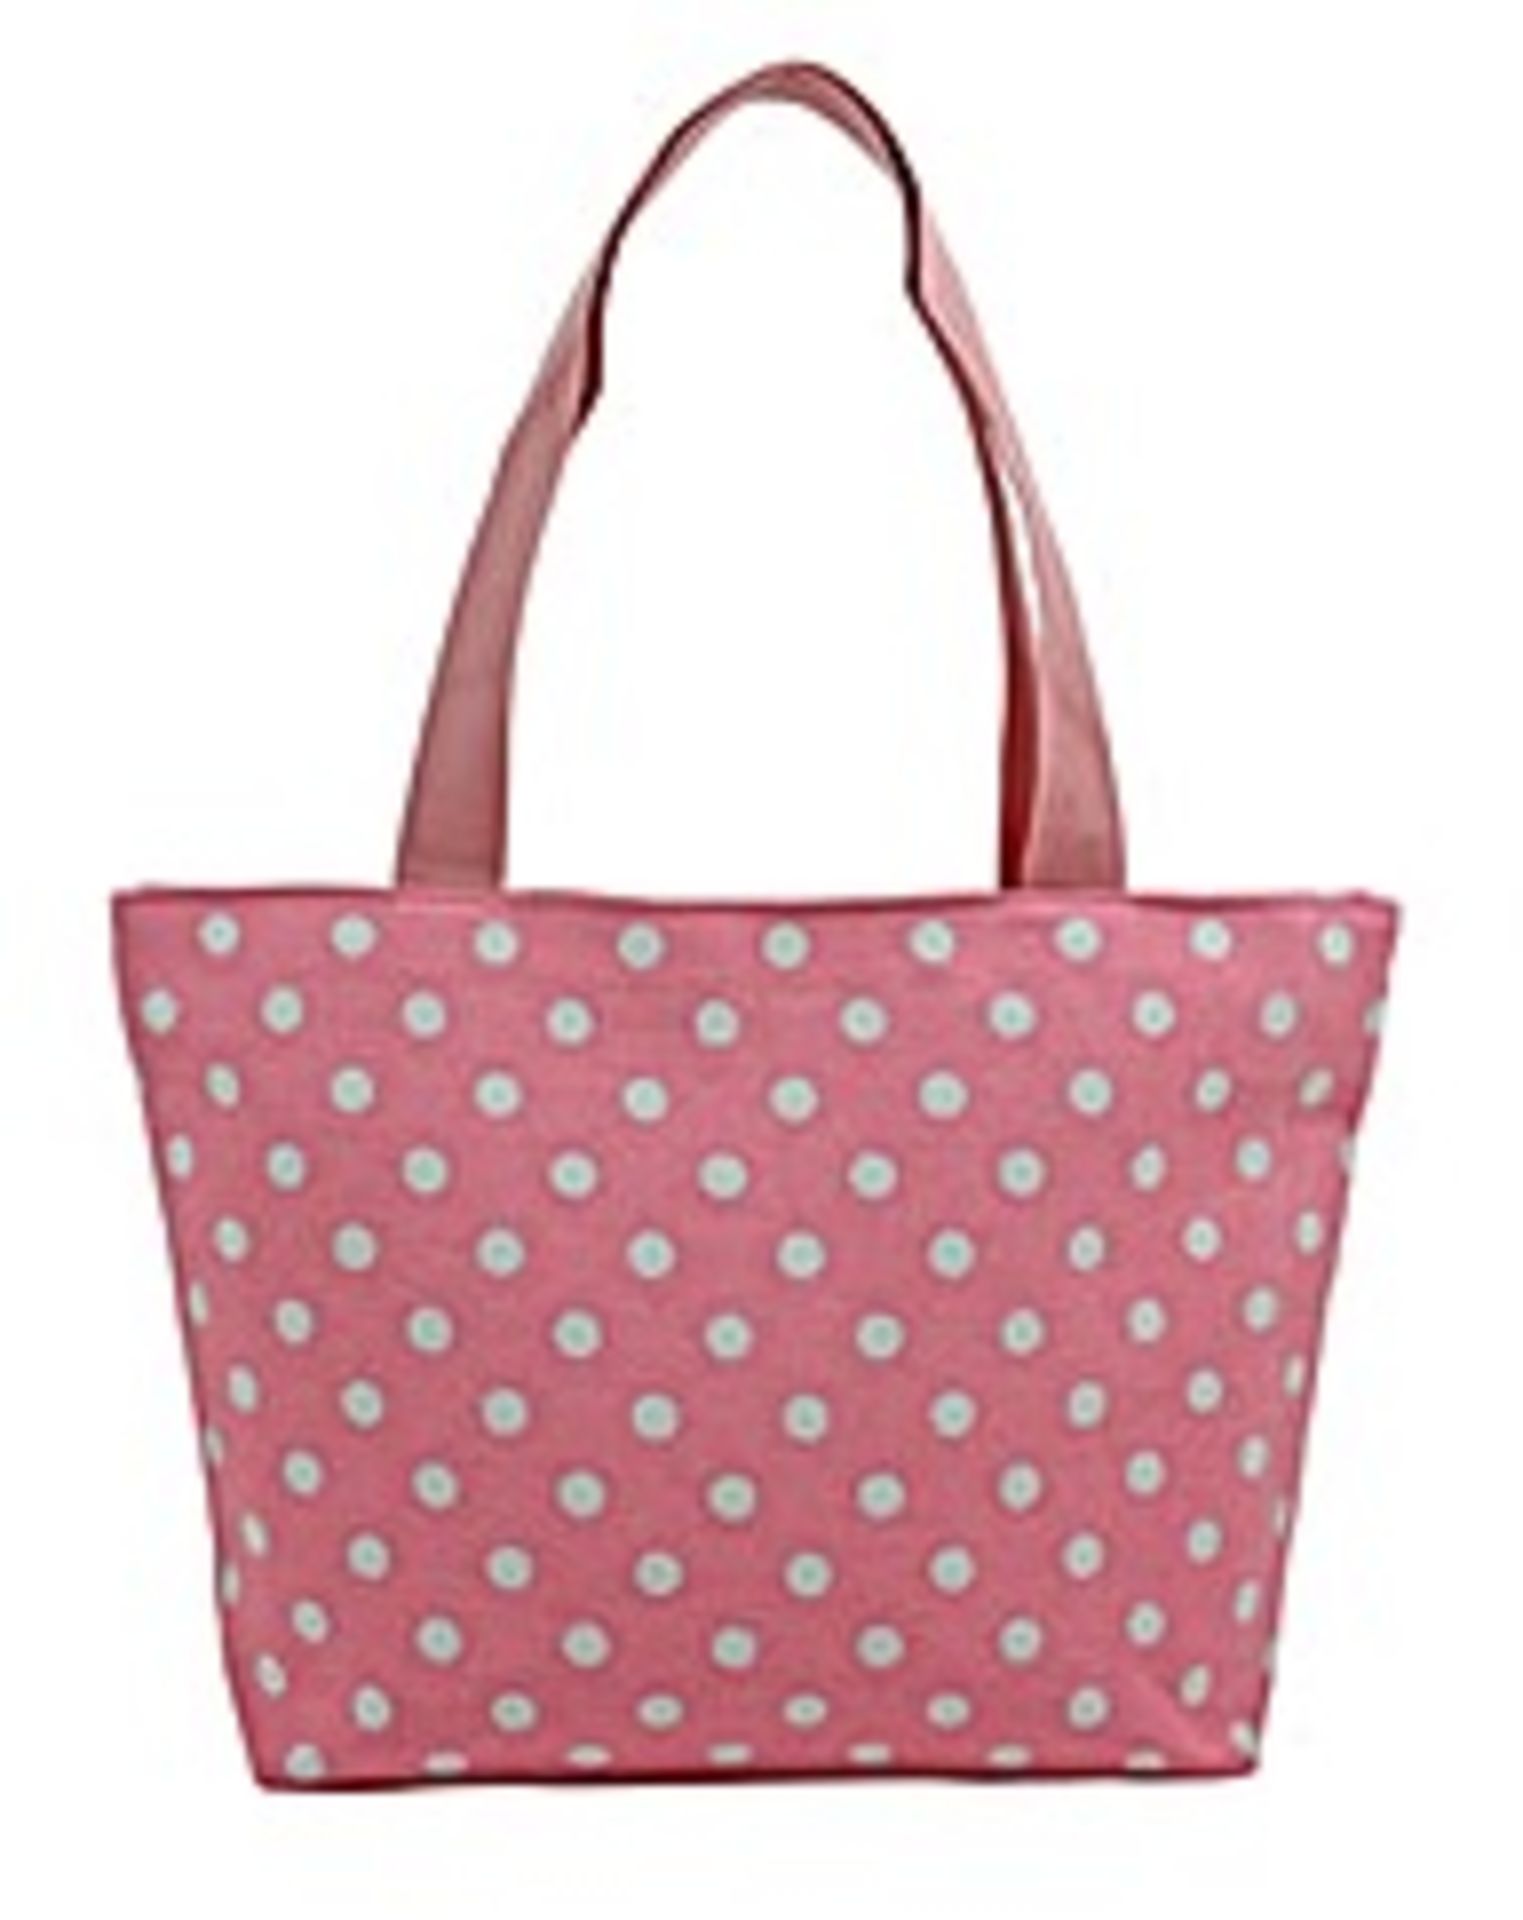 V Brand New Elizabeth Rose Fleur Pink With White Spots Shopping Bag X 2 YOUR BID PRICE TO BE